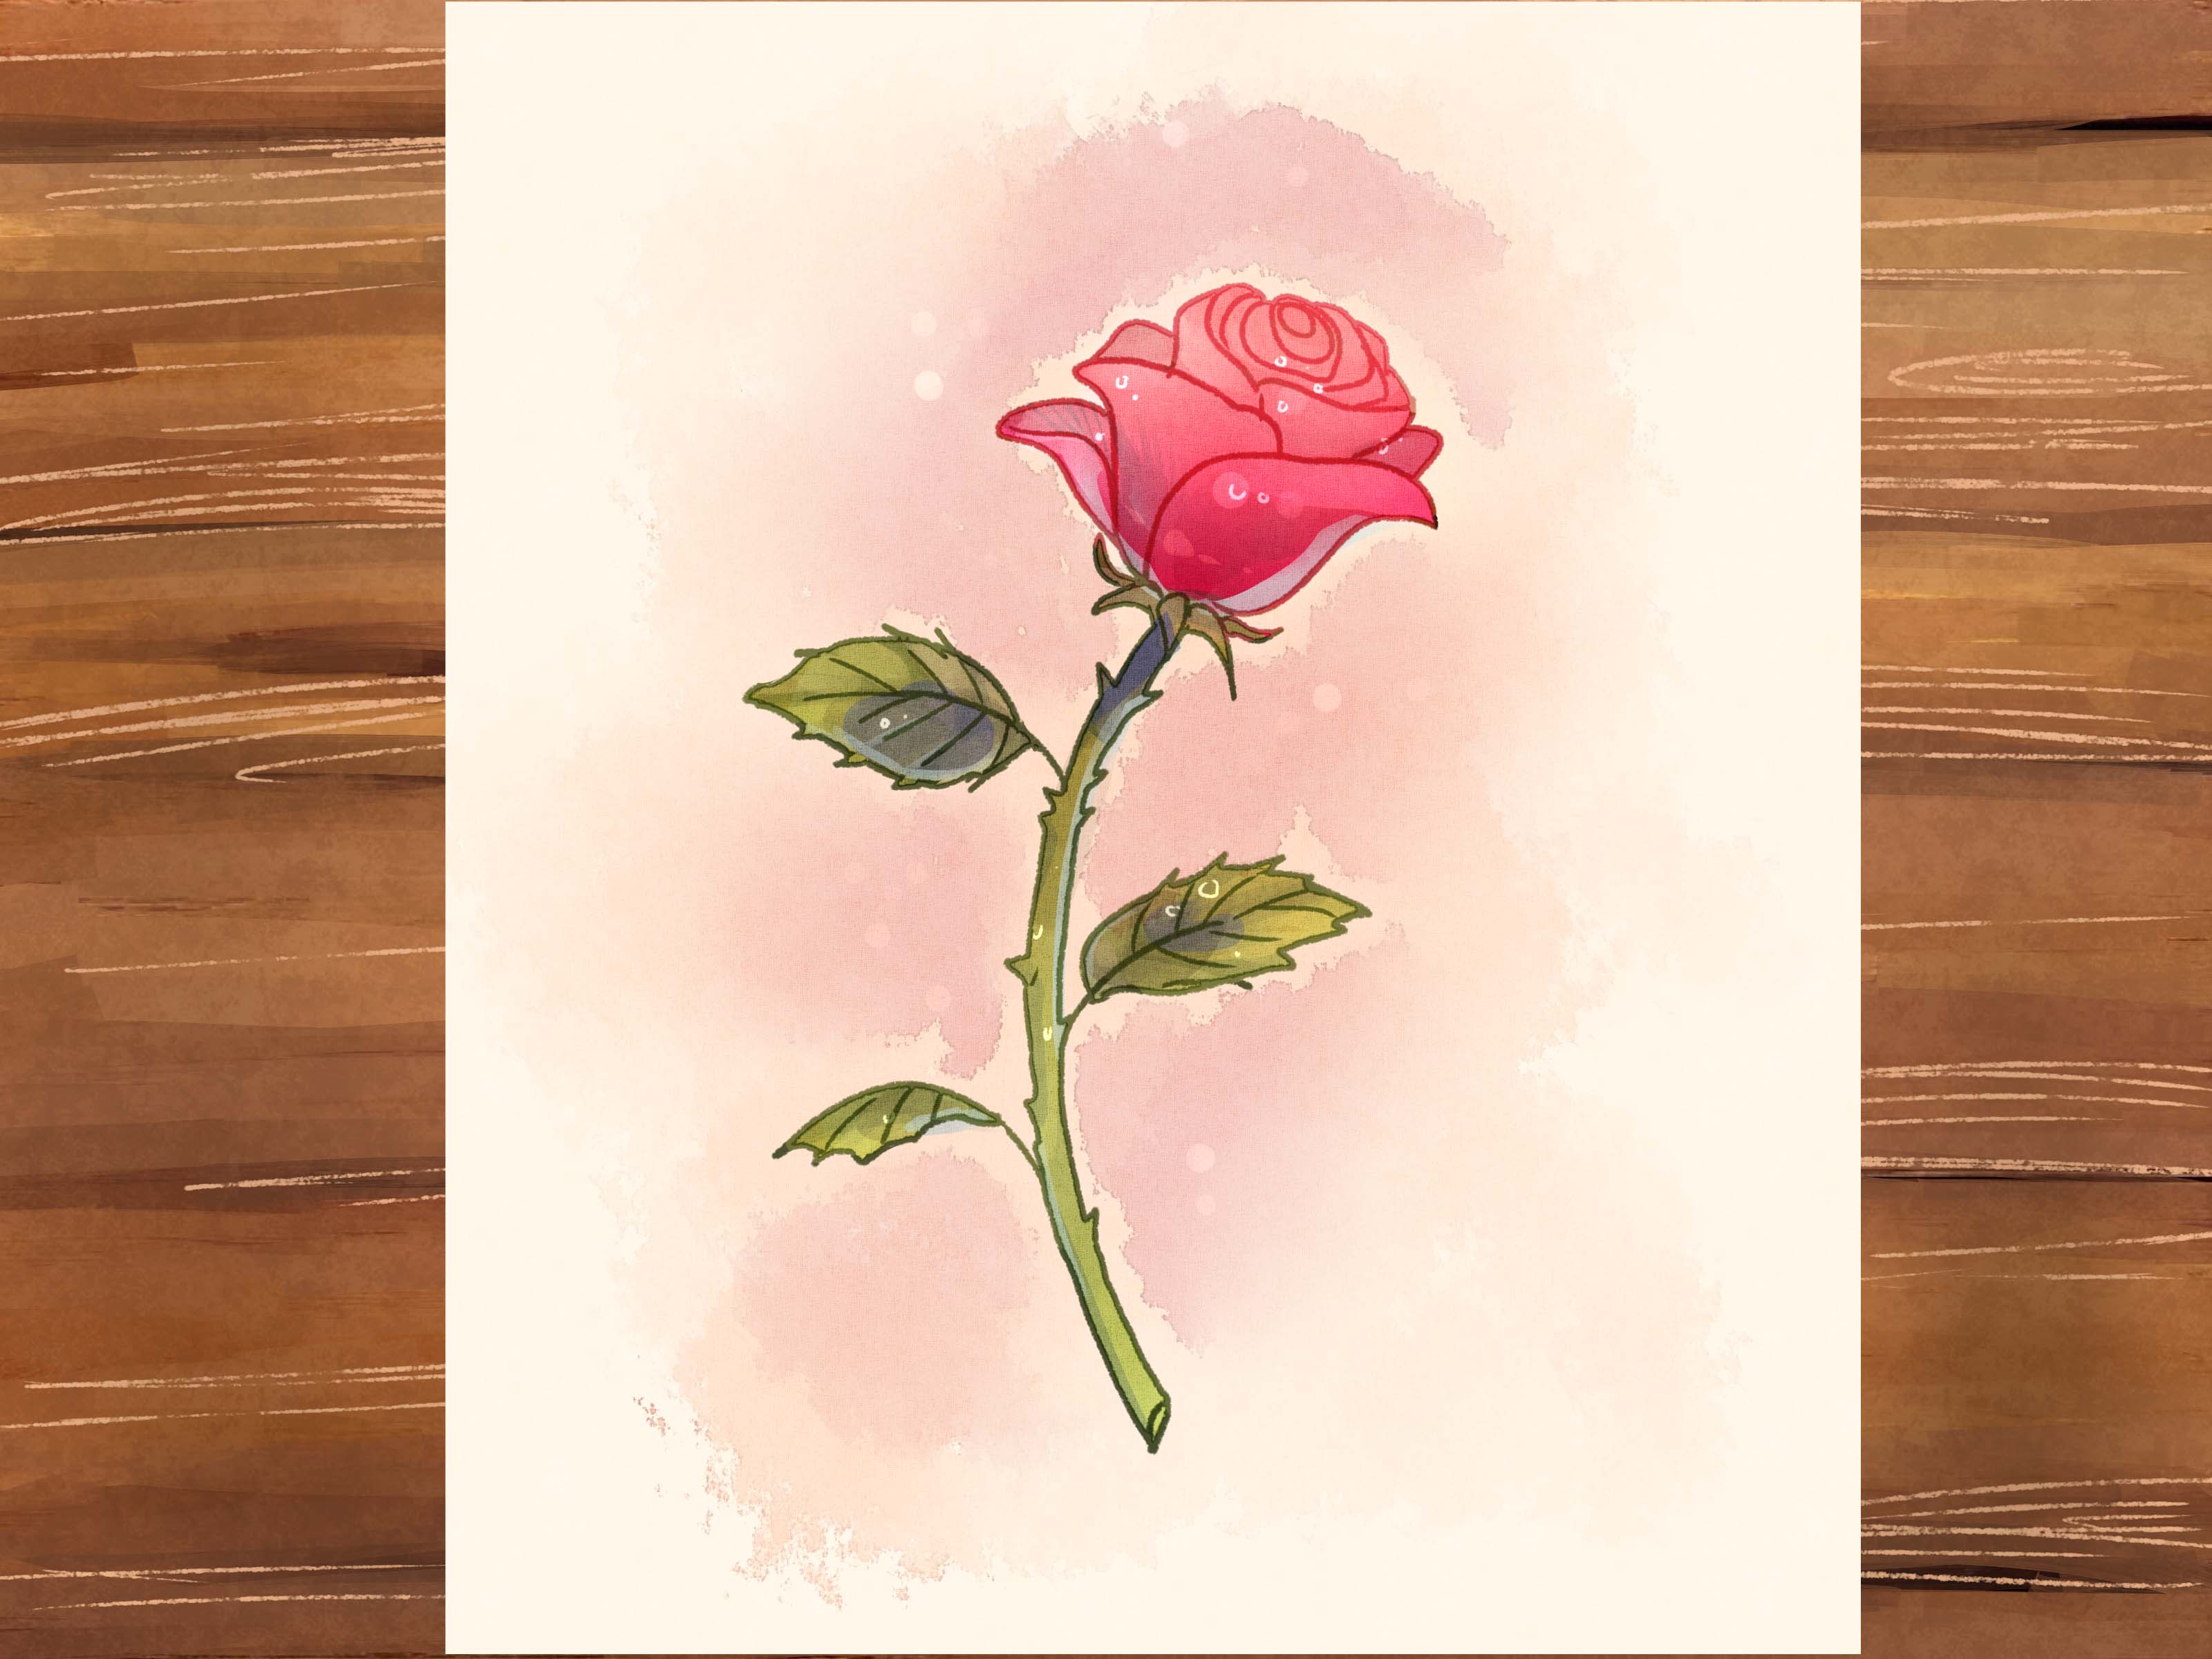 Image Titled Draw A Rose Step - Drawing Rose With Colored Pencils - HD Wallpaper 